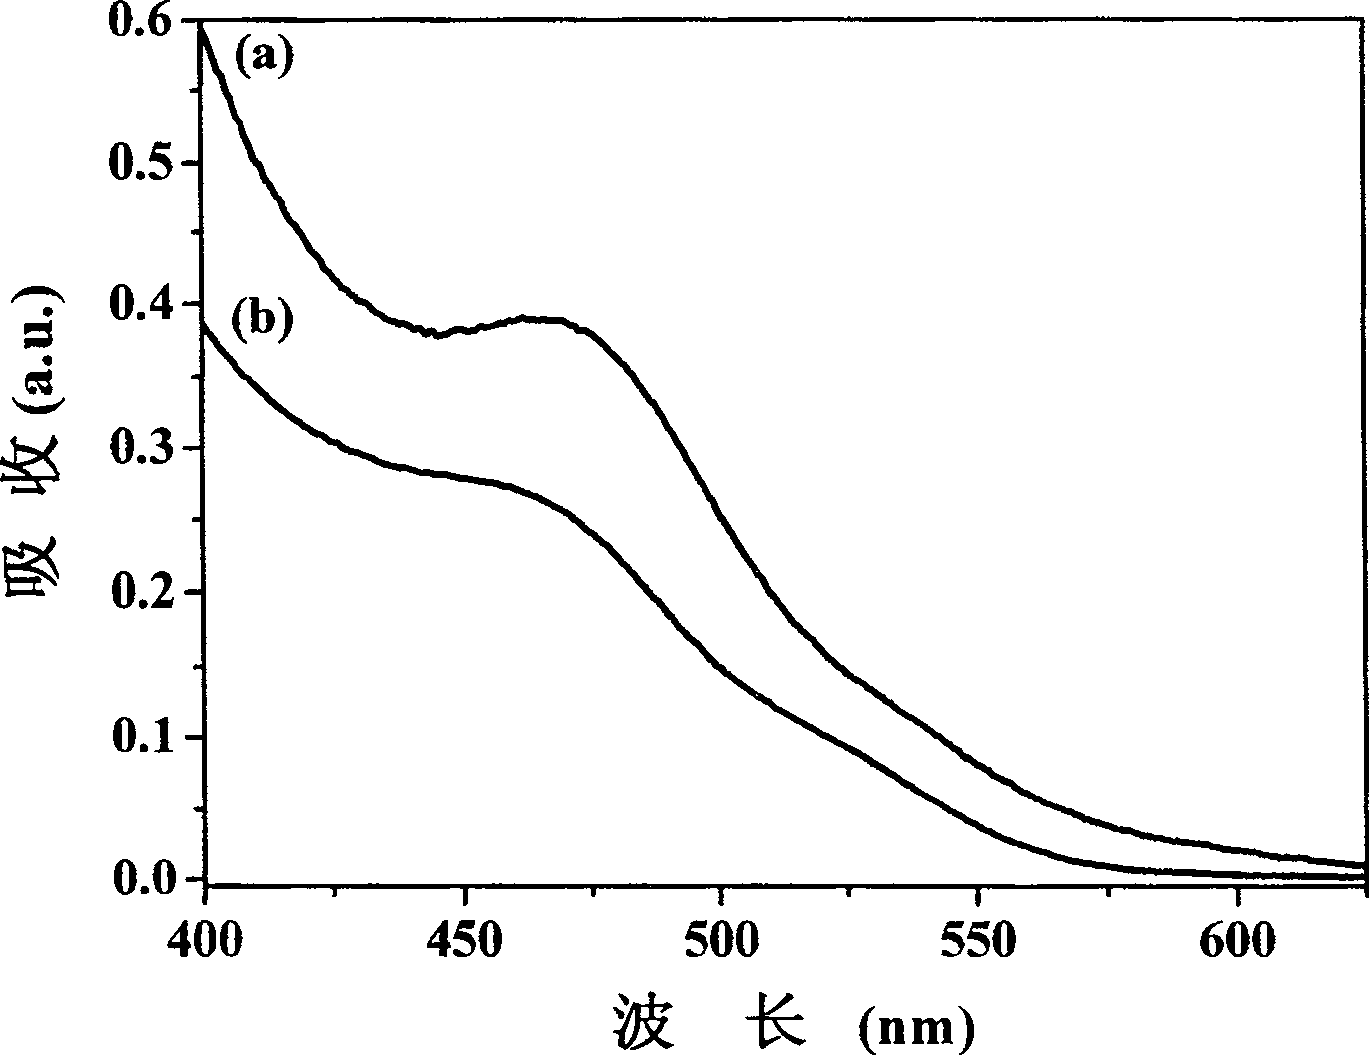 SERS detection method employing nano semiconductor material as substrate